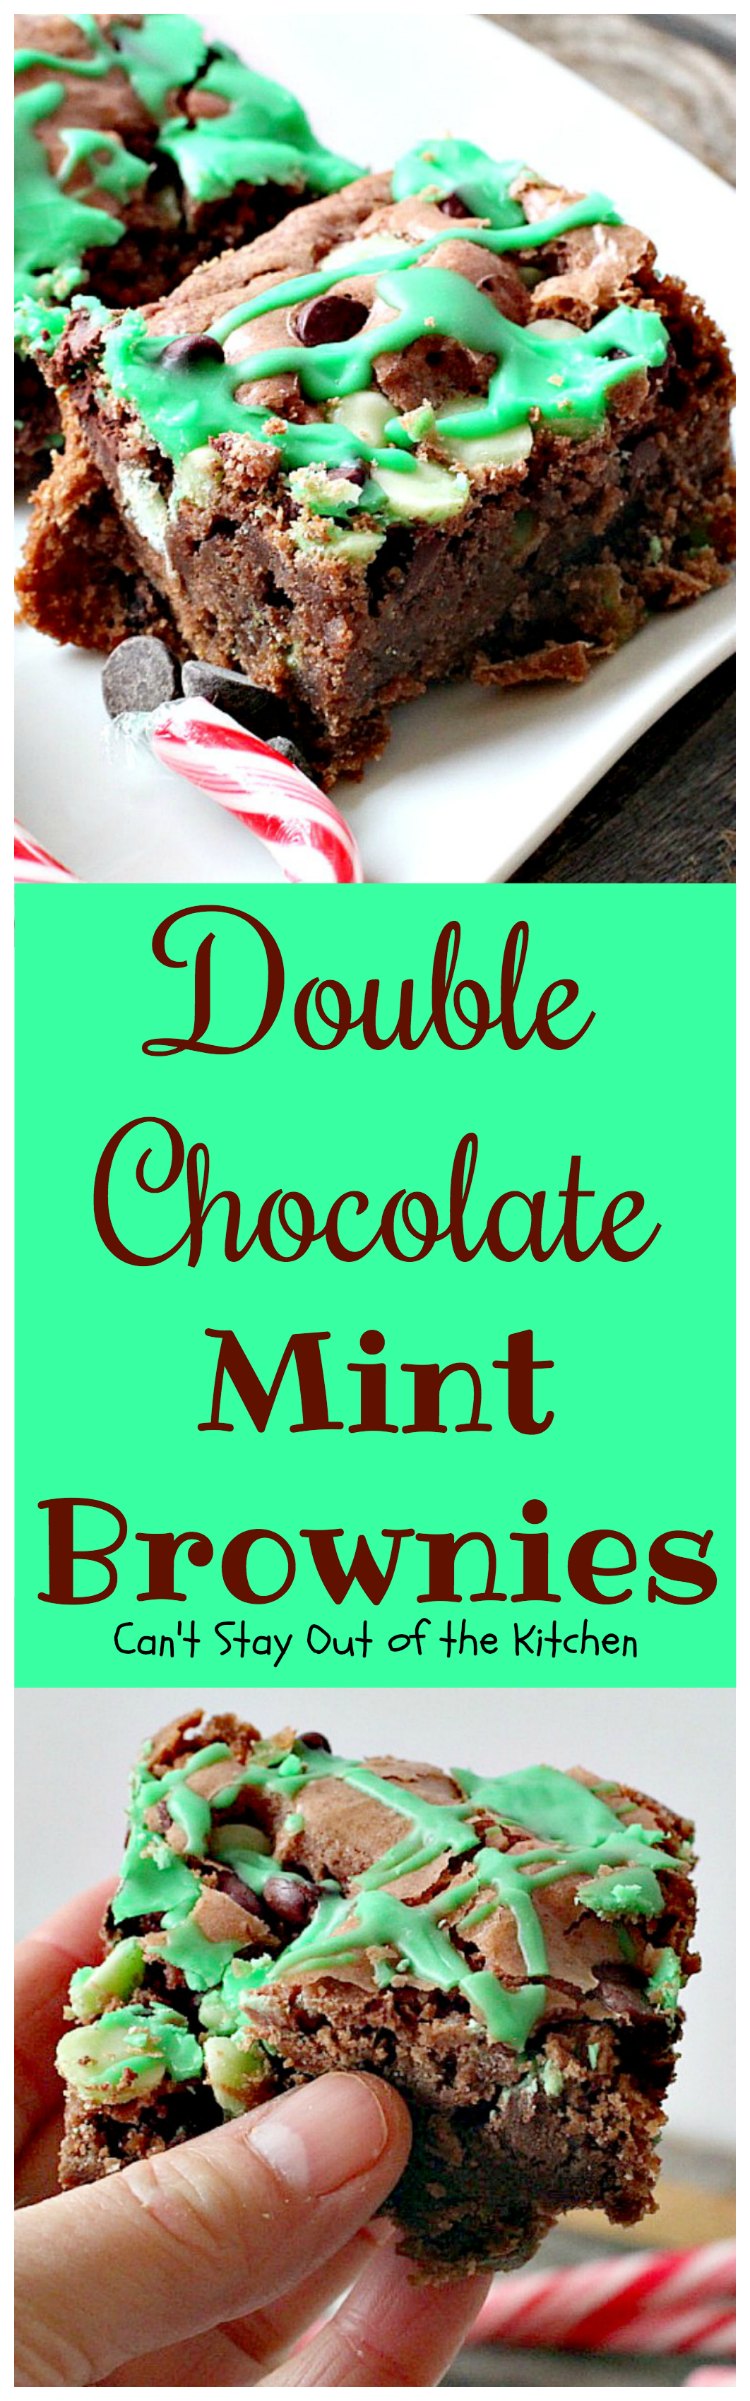 Double Chocolate Mint Brownies | Can't Stay Out of the Kitchen